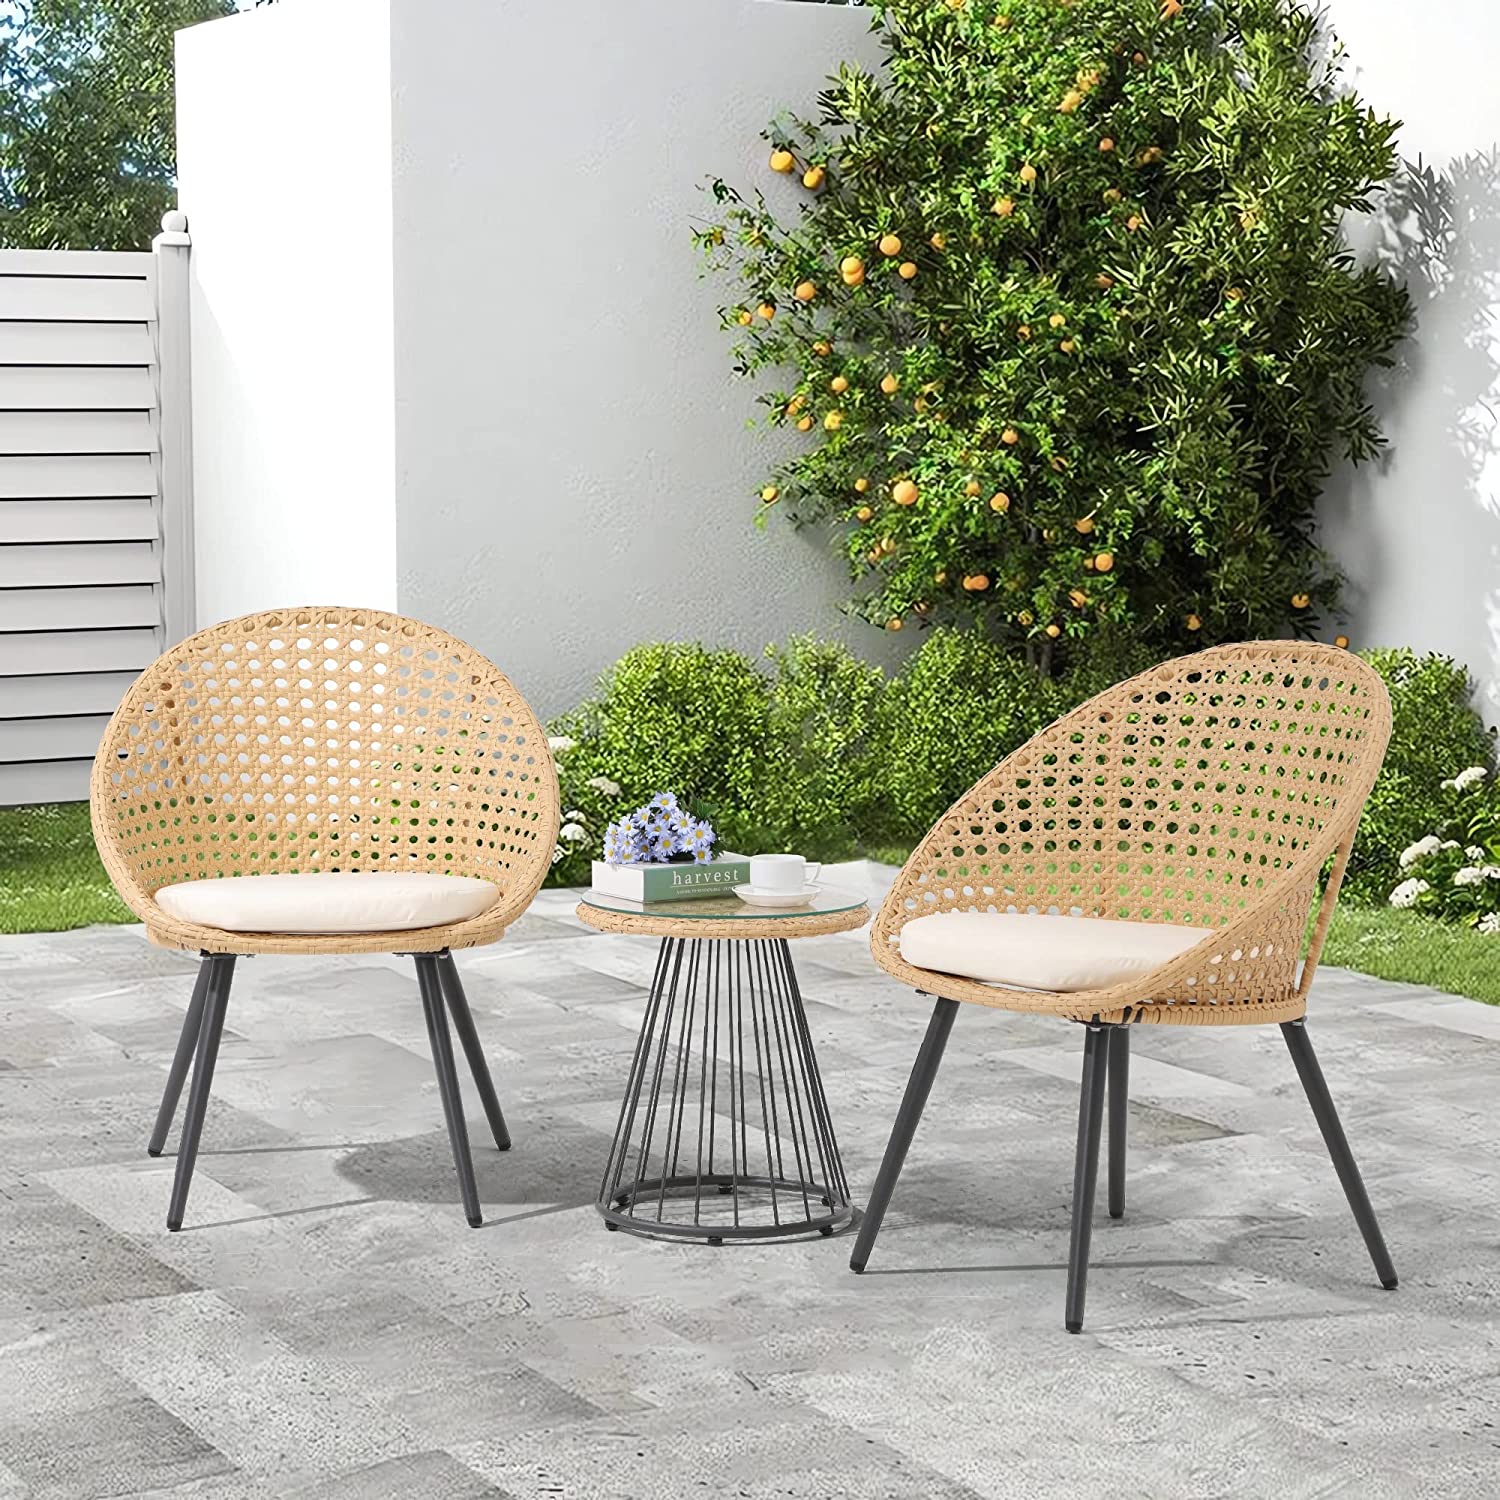 LOCCUS 3 Pieces Outdoor Patio Wicker Furniture Conversation set with Round Table